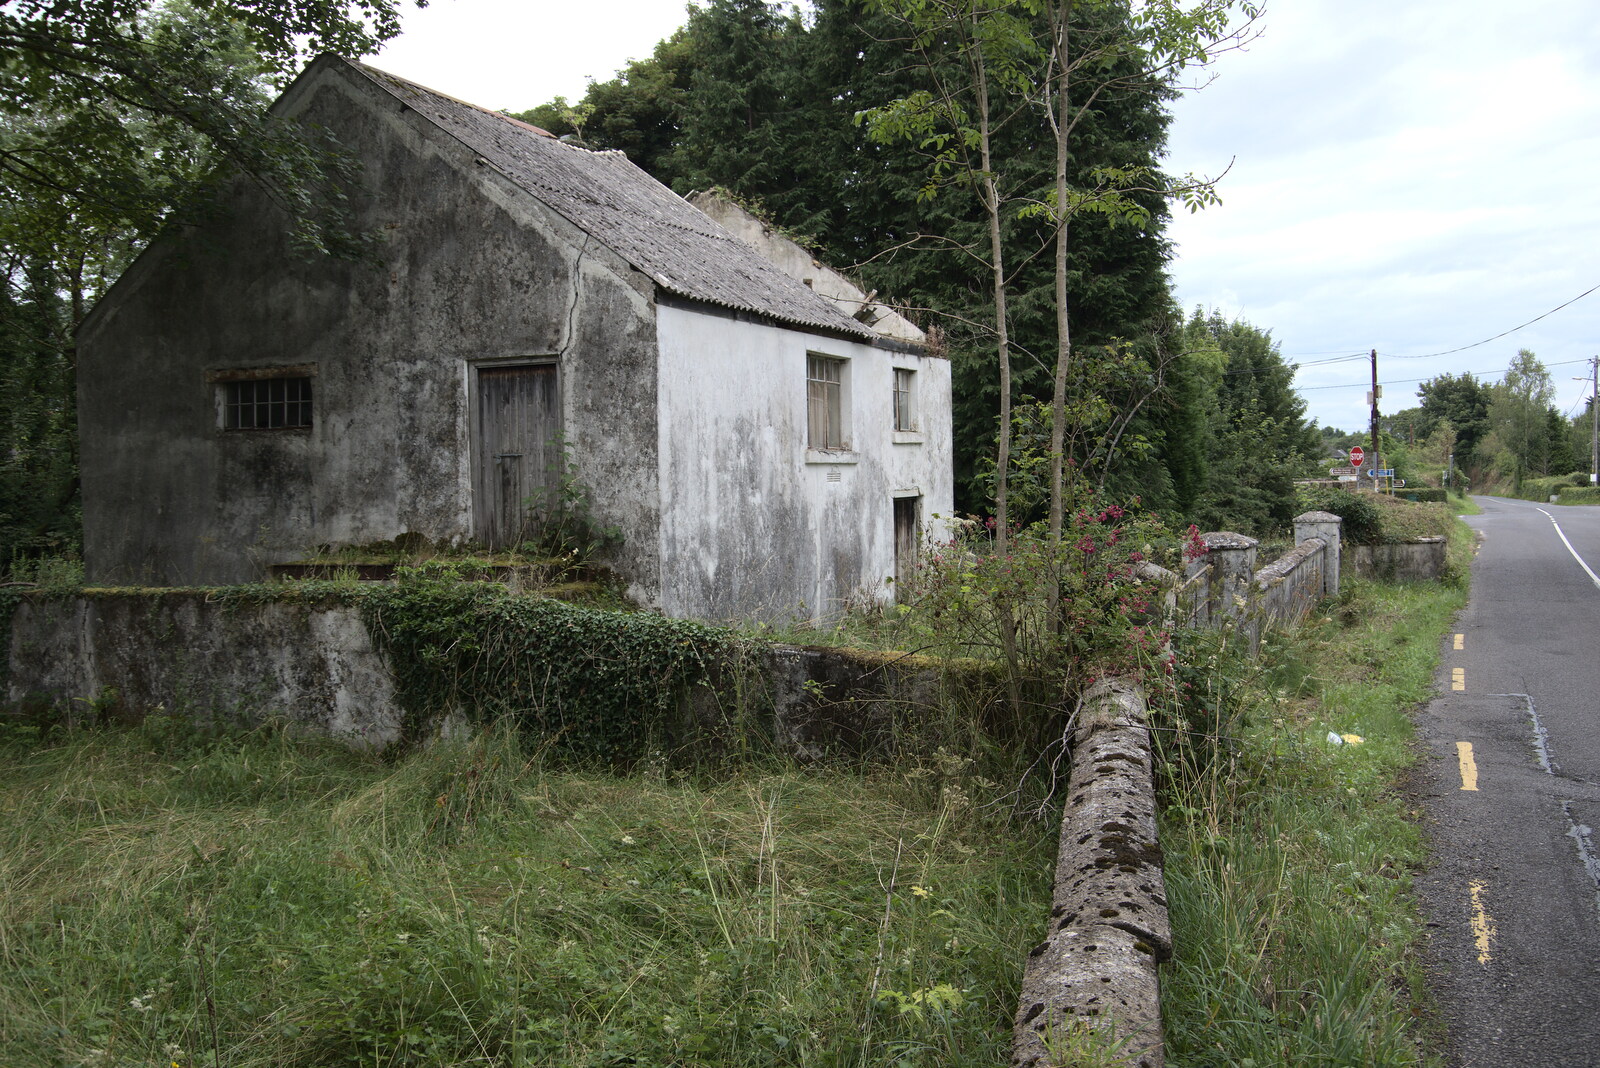 A Trip to Manorhamilton, County Leitrim, Ireland - 11th August 2021: The derelict house on the R282